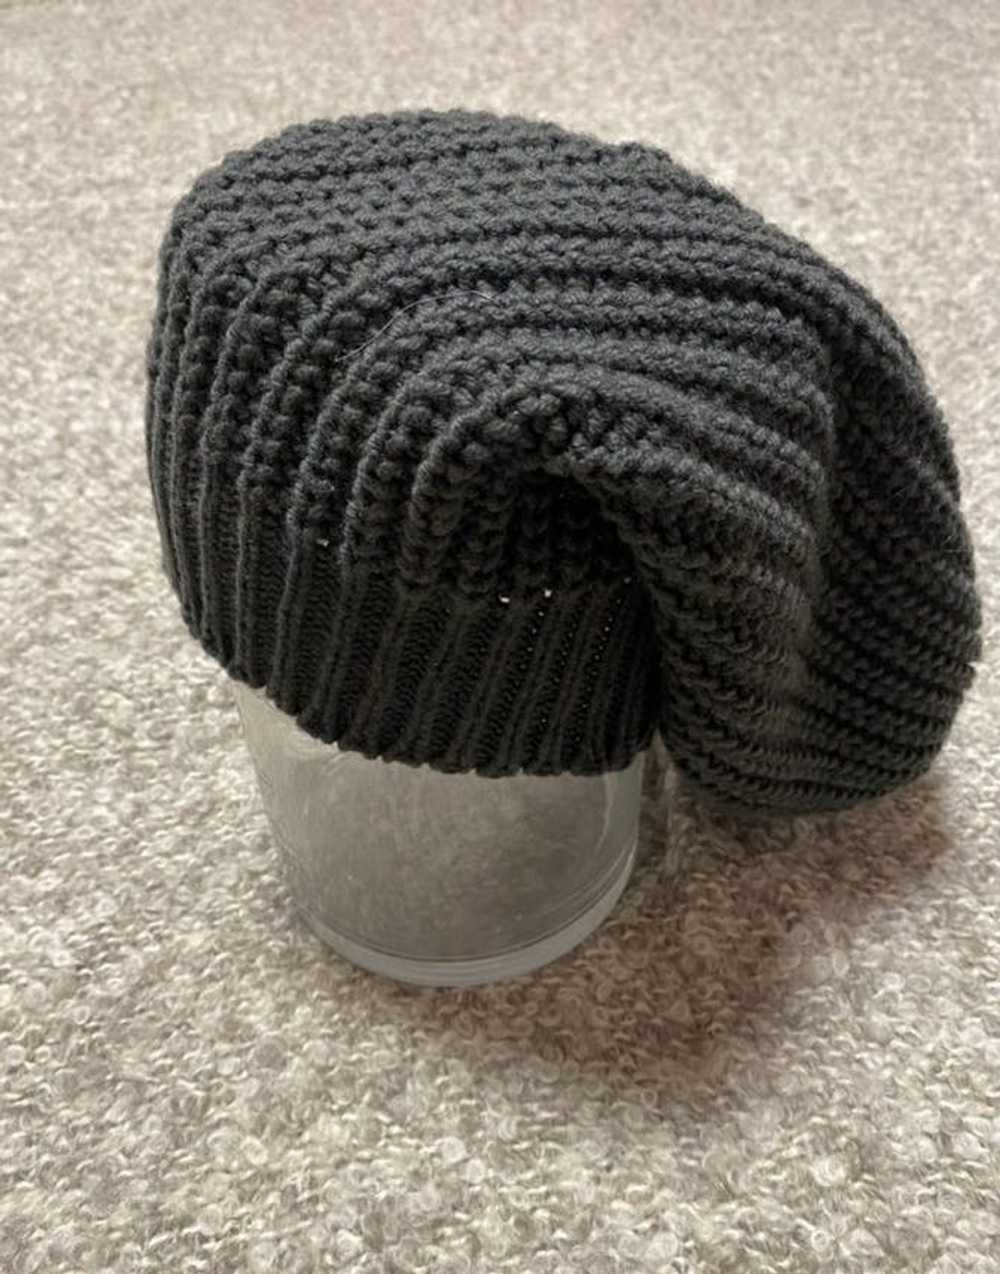 Rick Owens FW14 Moody Wool Knitted Beanie Hat - image 3